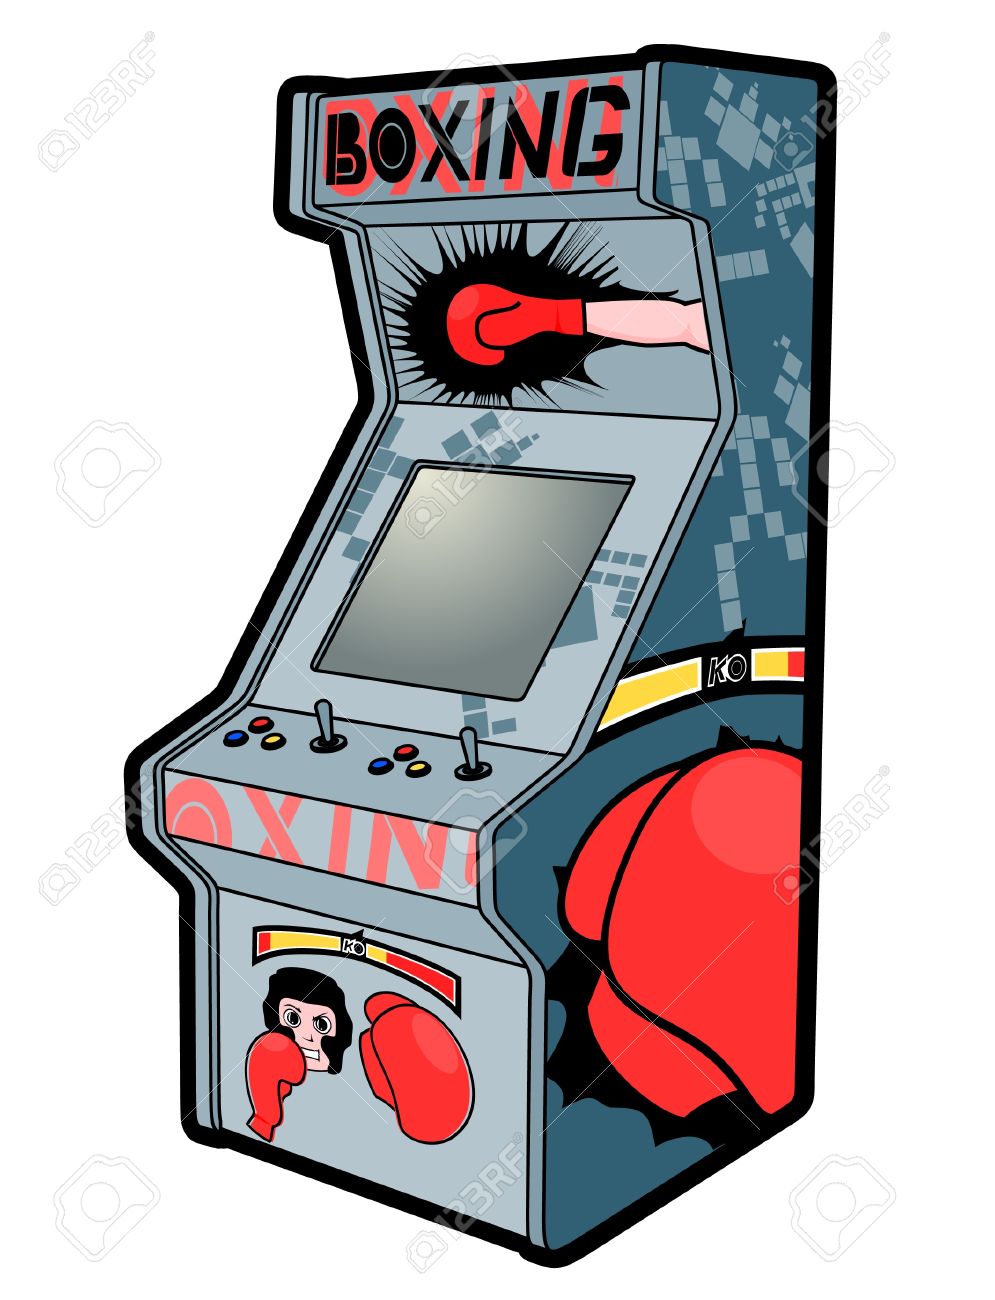 Boxing Arcade Style Royalty Free Cliparts, Vectors, And Stock.